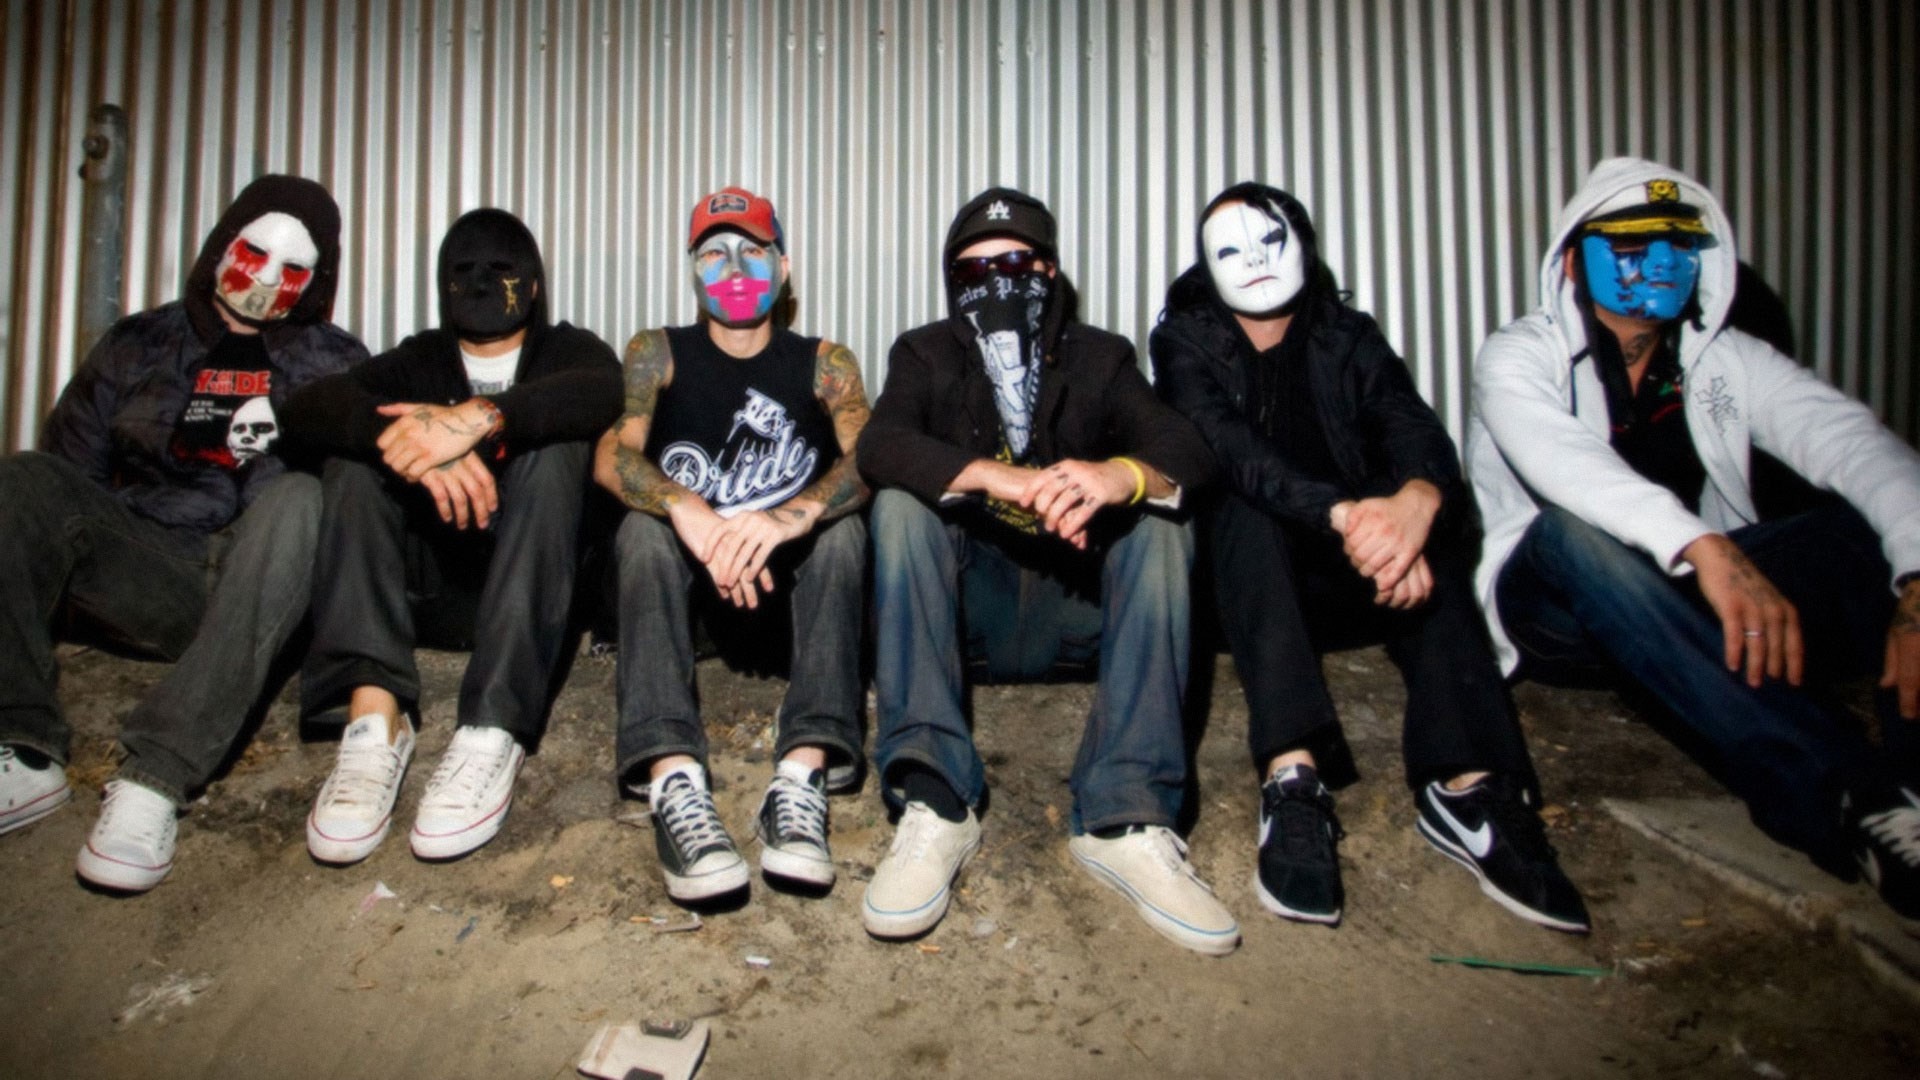 1920x1080 Armstead Little - hollywood undead image - Full HD Backgrounds -   px